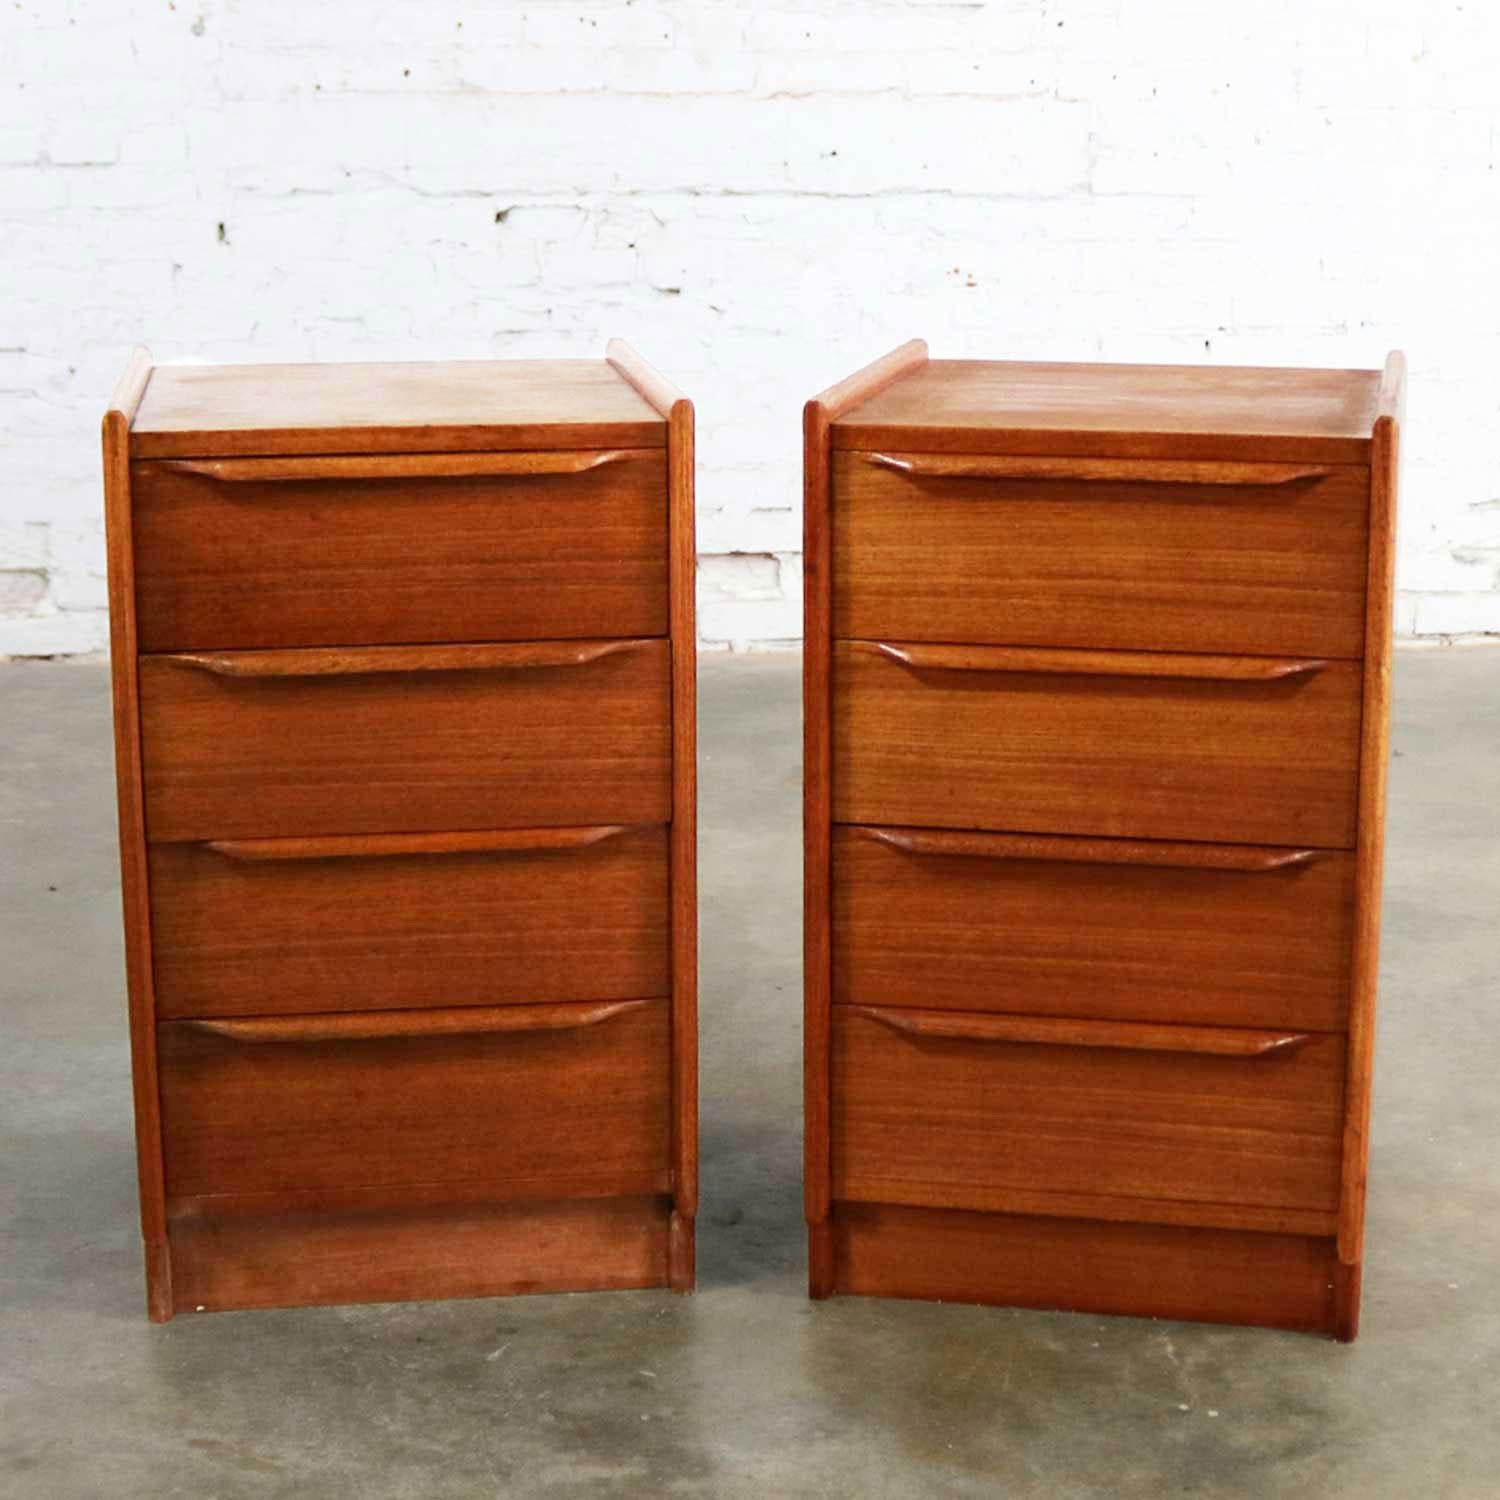 Handsome pair of Scandinavian Modern teak nightstands with four drawers each and mounted on a kick base. They are also equipped with a bracket for wall hanging. They are in fabulous vintage condition with normal wear for their age, circa 1966.